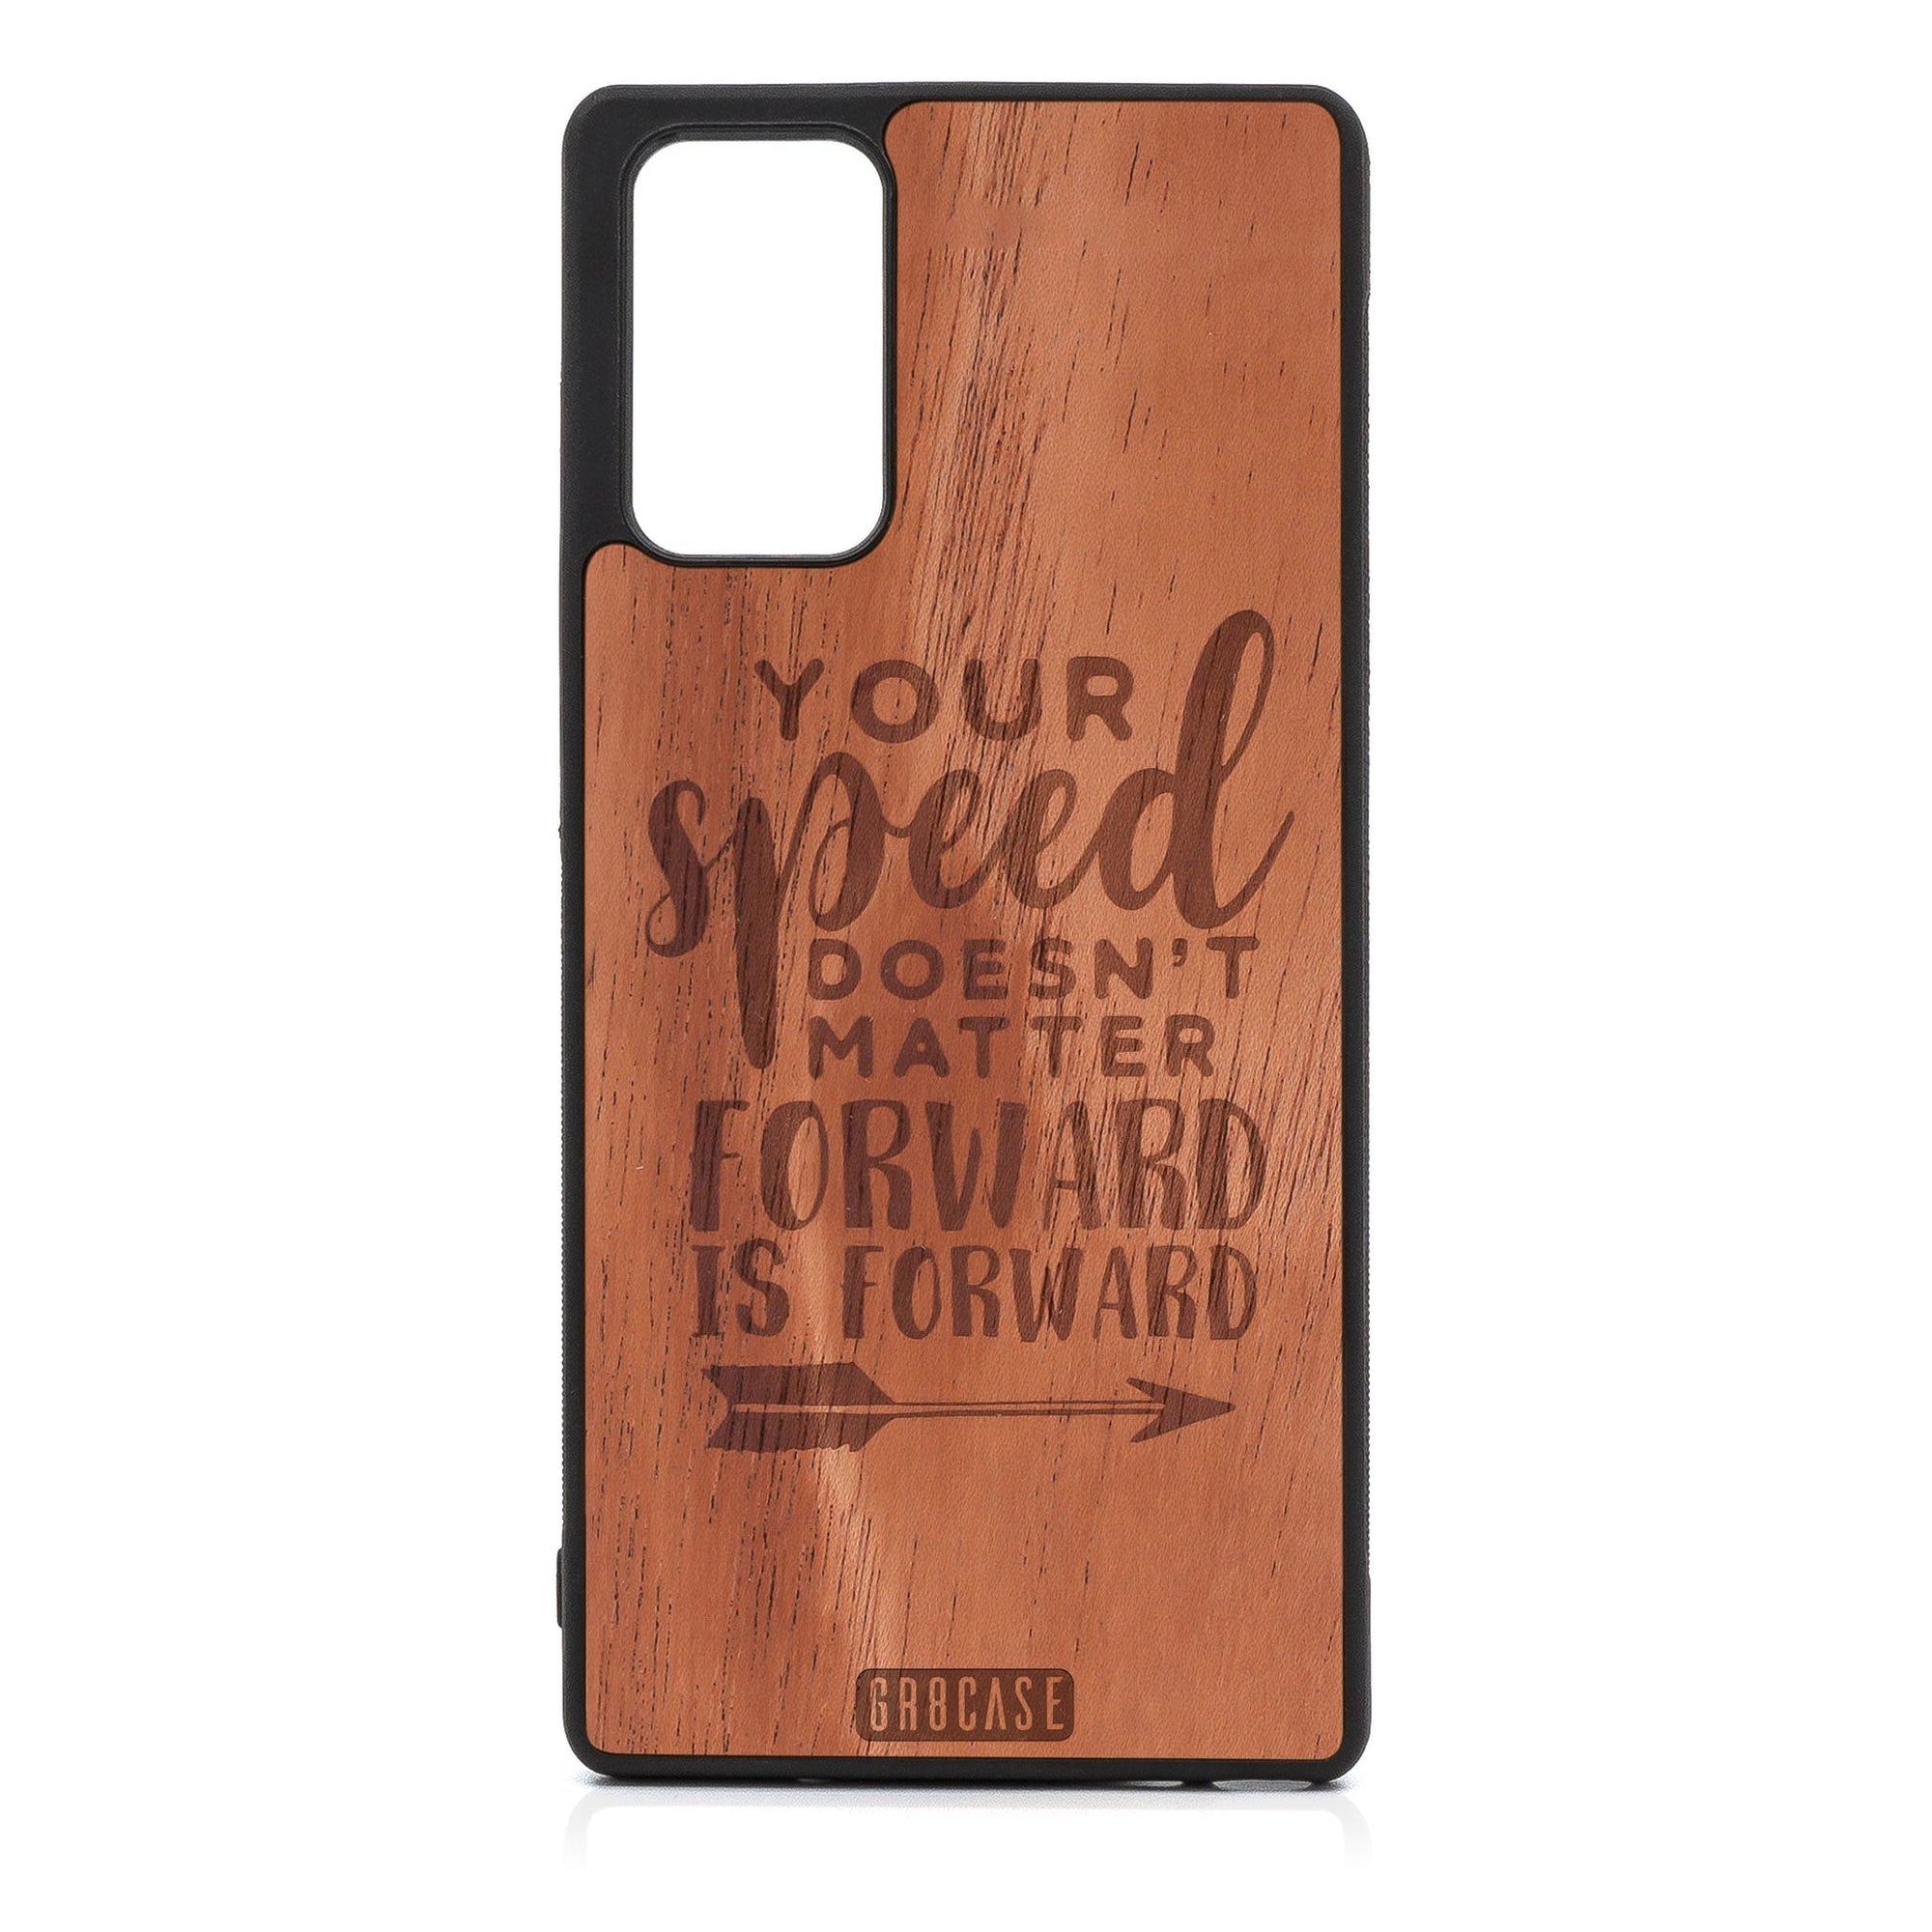 Your Speed Doesn't Matter Forward Is Forward Design Wood Case For Samsung Galaxy A71 5G